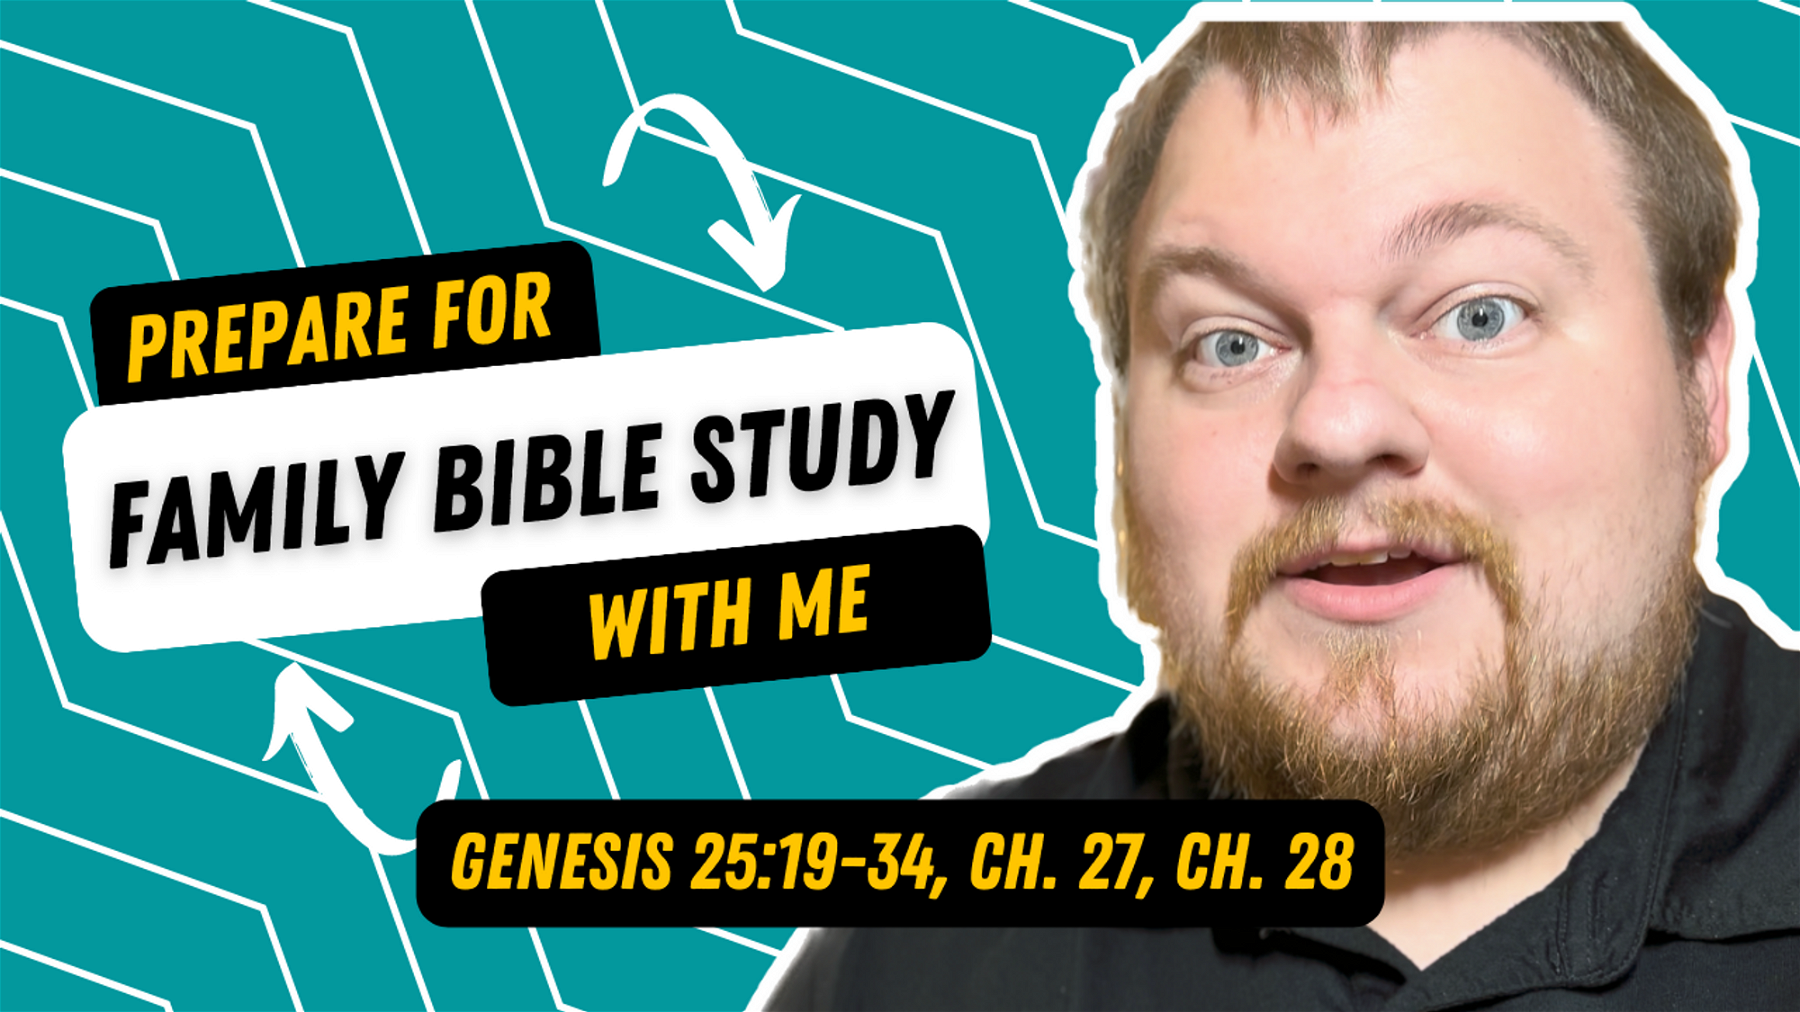 Let’s Study Genesis 25:19-34, ch. 27, ch. 28 - Prepare for Family Bible Study with Me